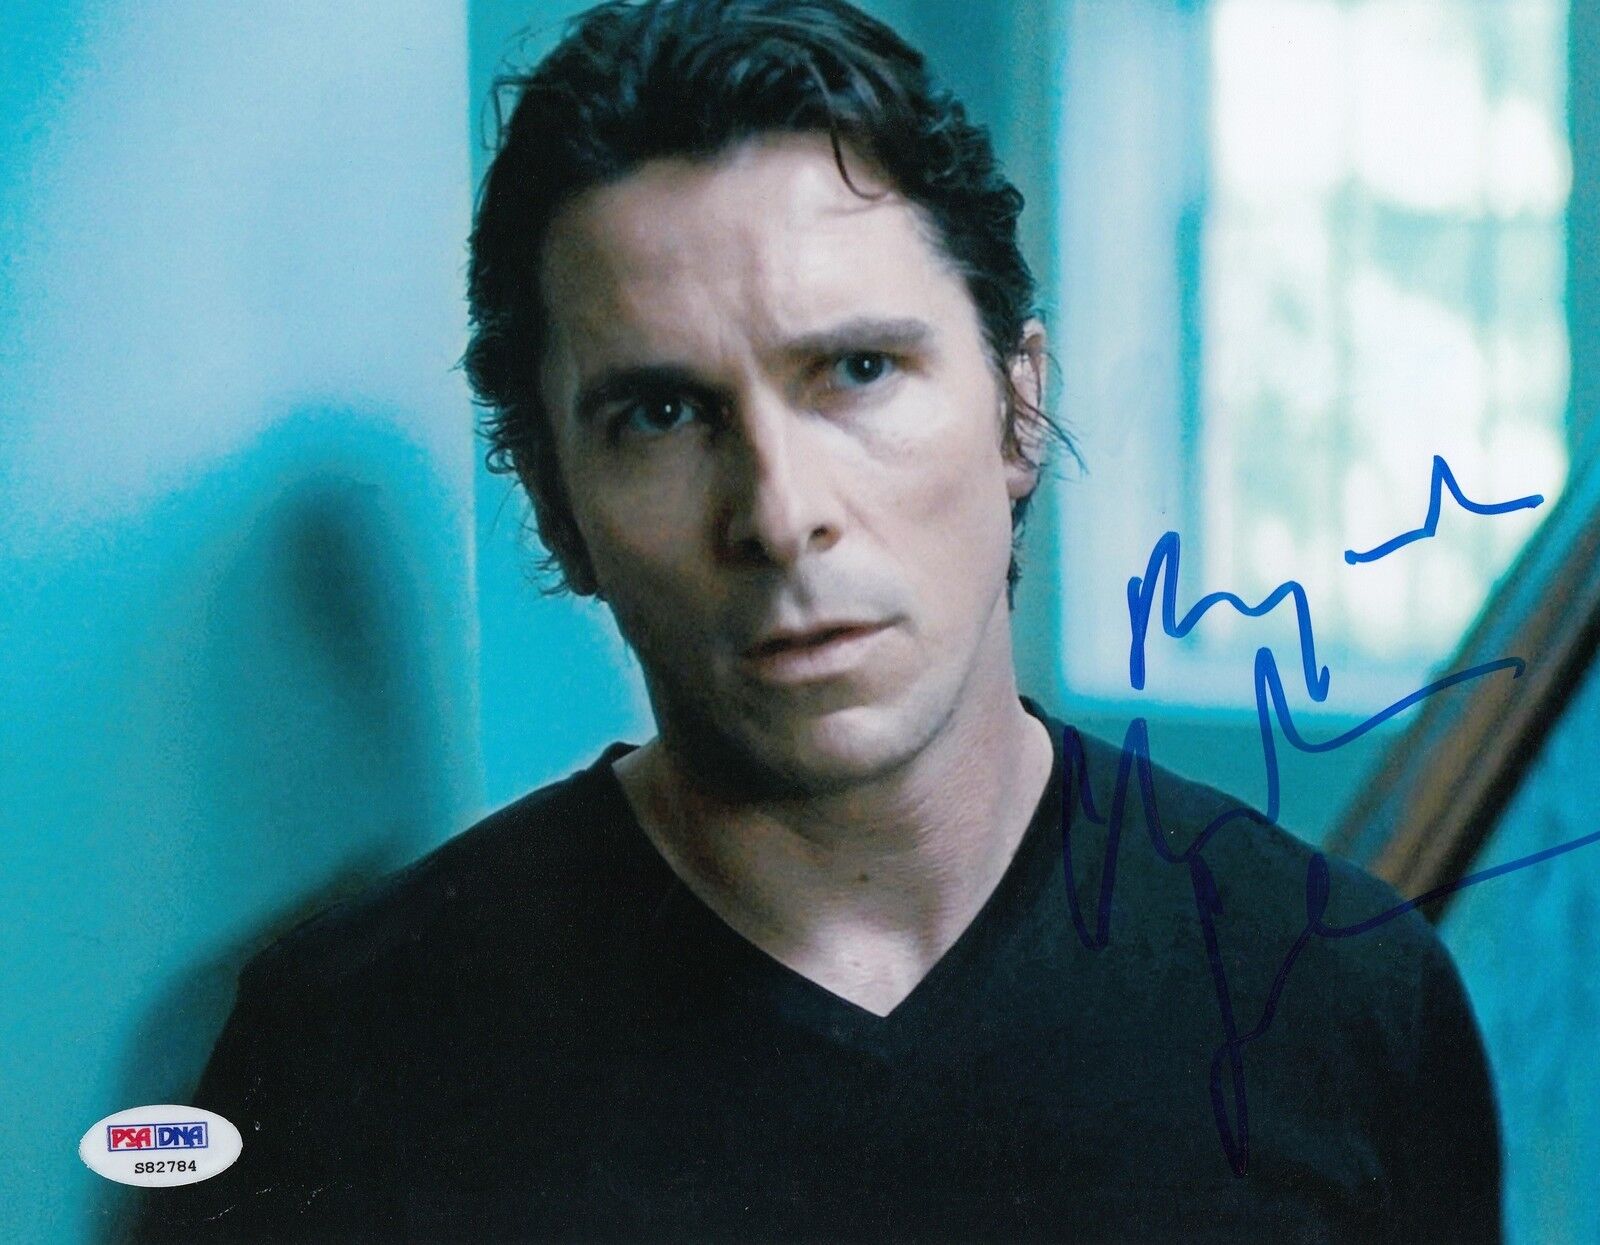 Christian Bale signed *The Dark Knight Rises* 8X10 Photo Poster painting PSA/DNA Authetic S82784